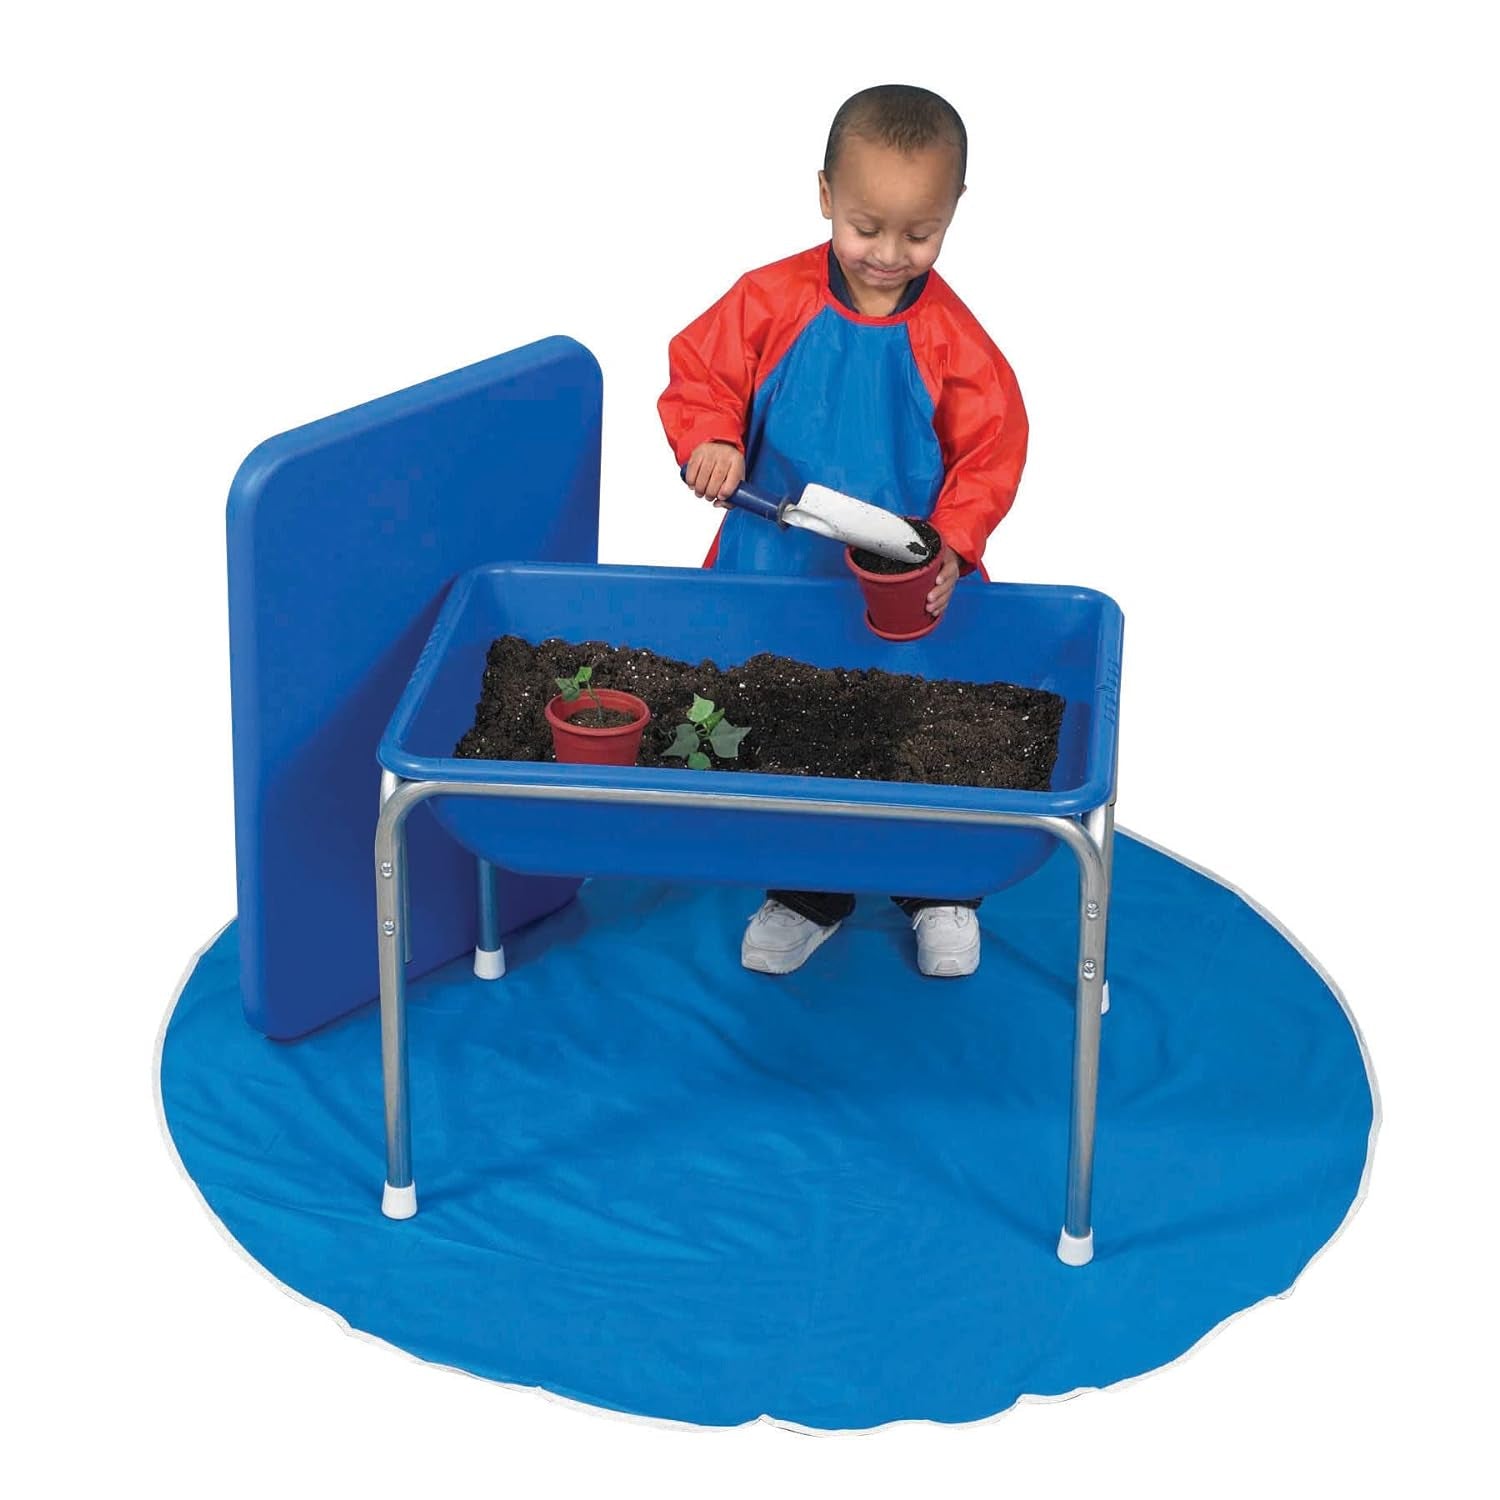 18" Small Sensory Table, Sandbox with Lid, Water Table for Kids, Blue